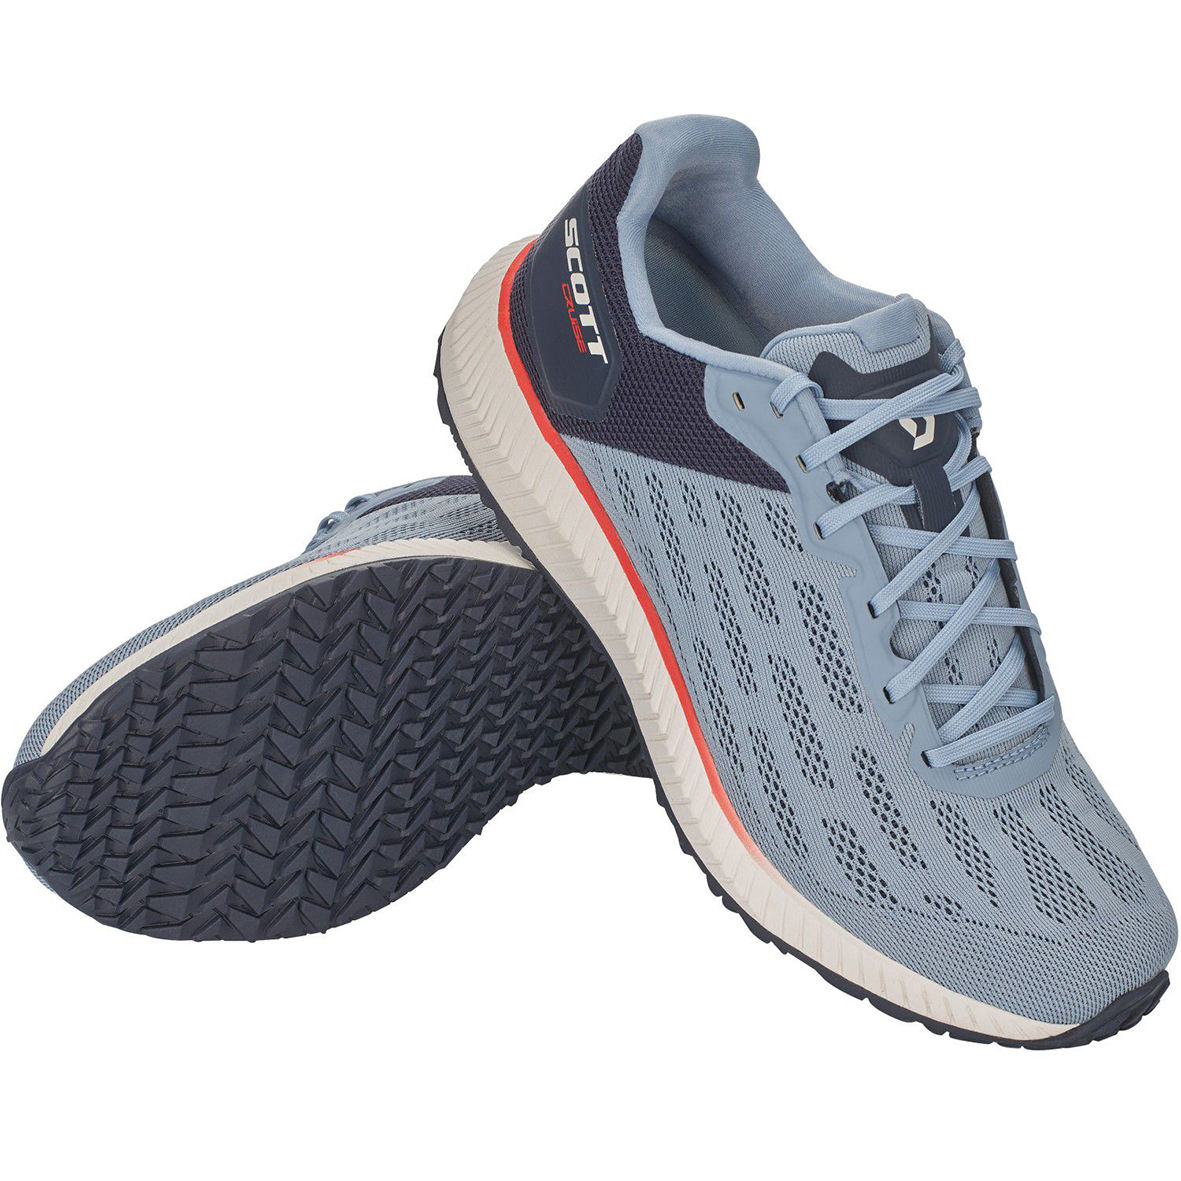 RUNNING SHOES SCOTT WS CRUISE, GLACE BLUE-MIDNIGHT BLUE WOMAN.